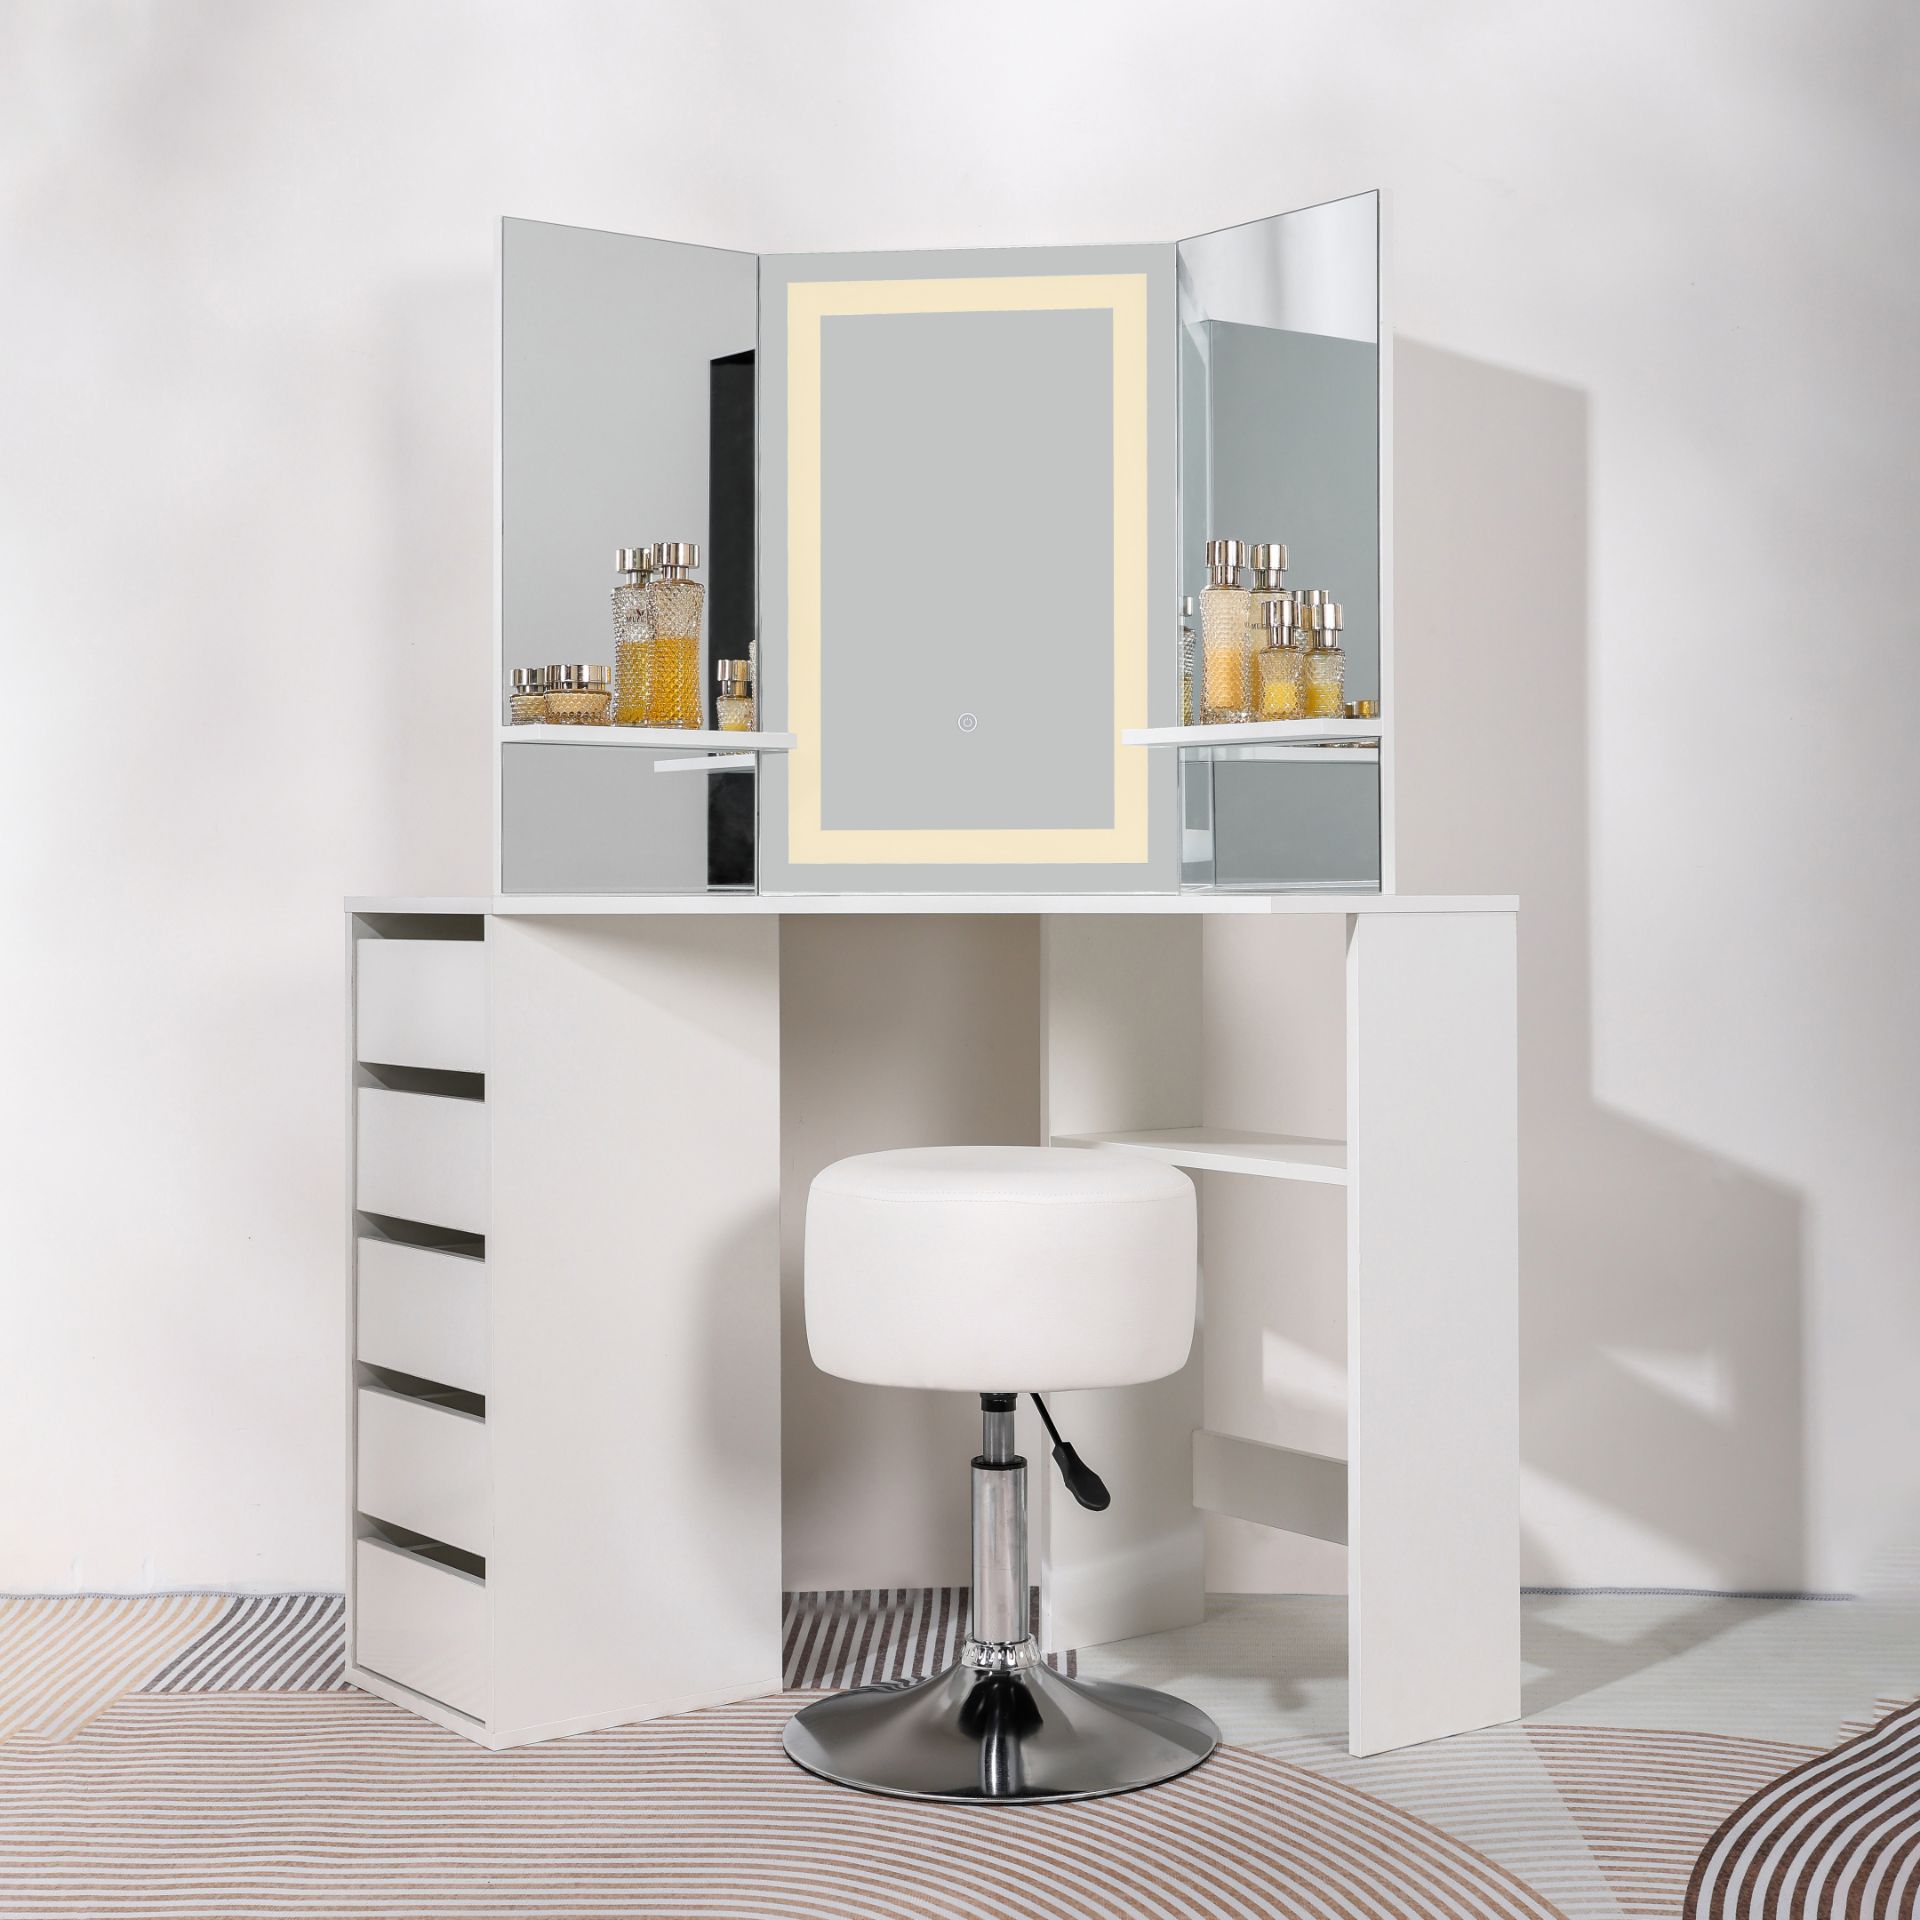 10 X BRAND NEW MAKE UP CORNER DRESSING TABLE 5 DRAWER WITH TOUCH LED MIRROR & STOOL RRP £3500 - Image 4 of 4